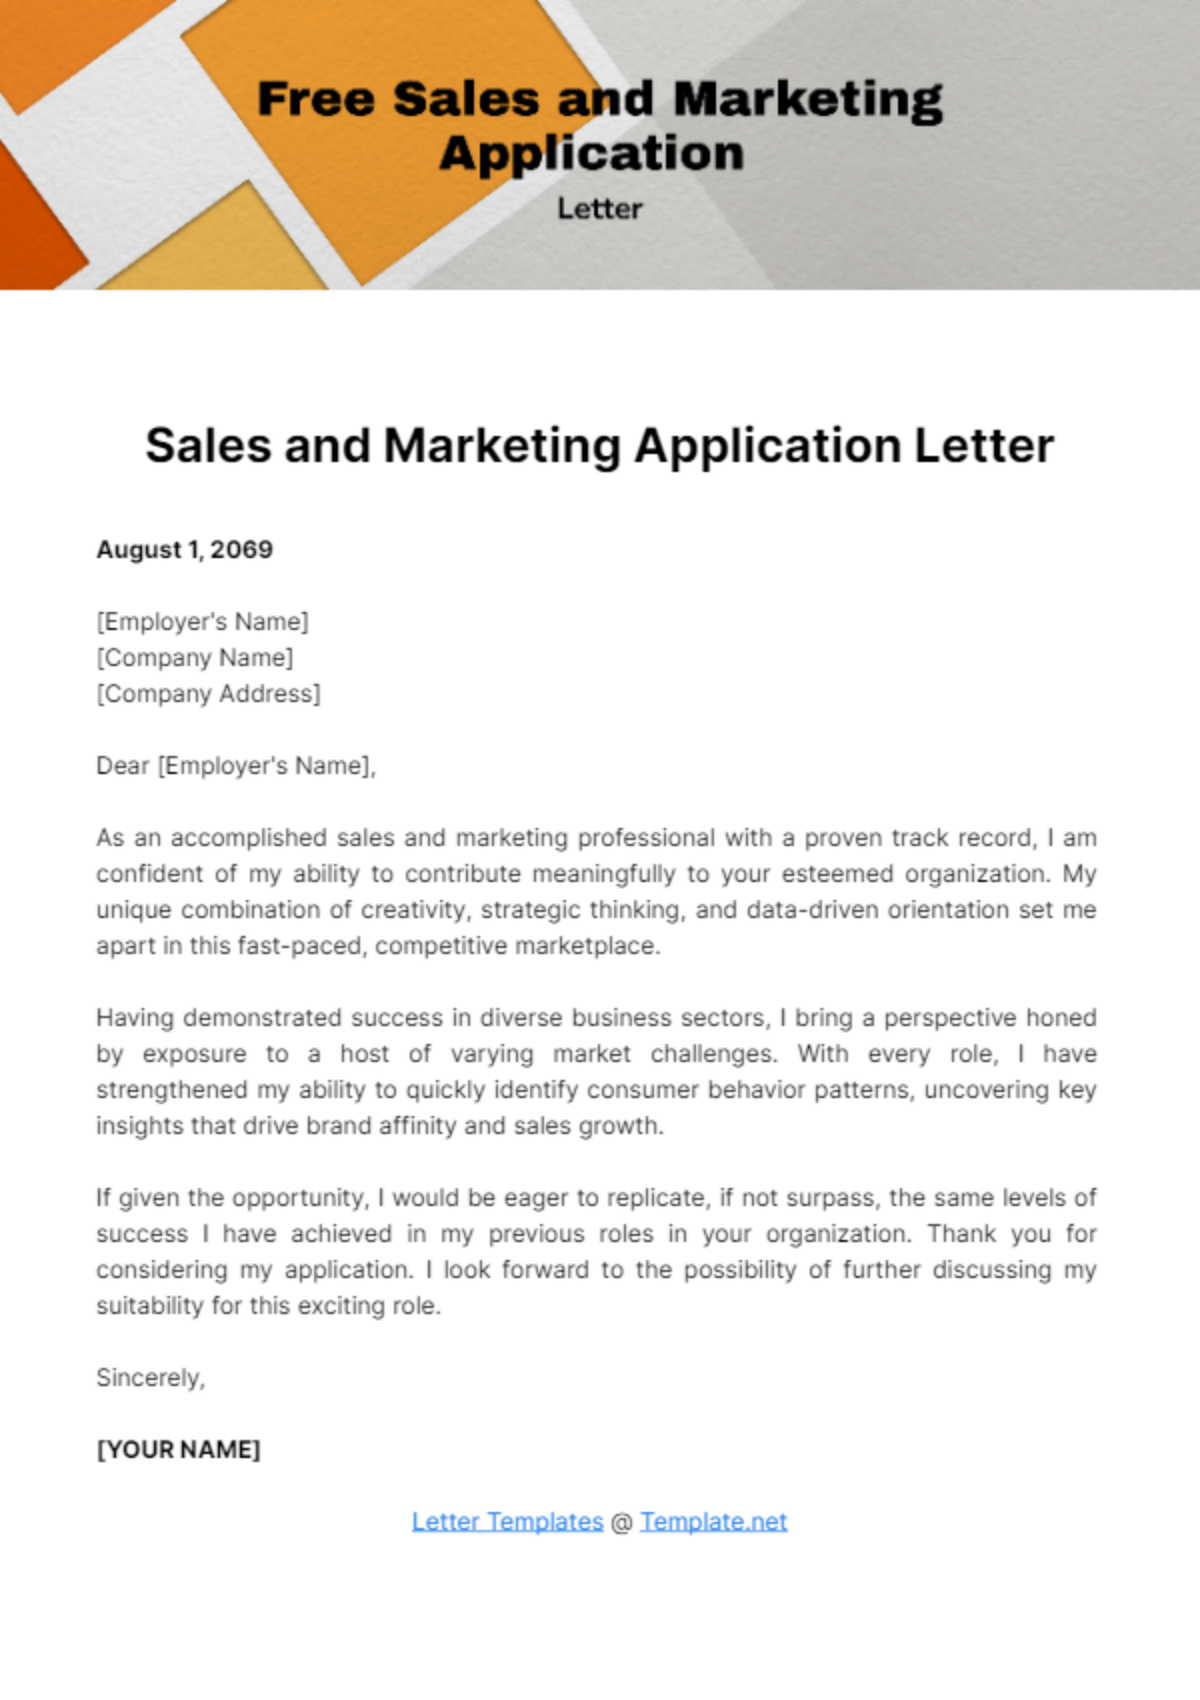 Sales and Marketing Application Letter Template